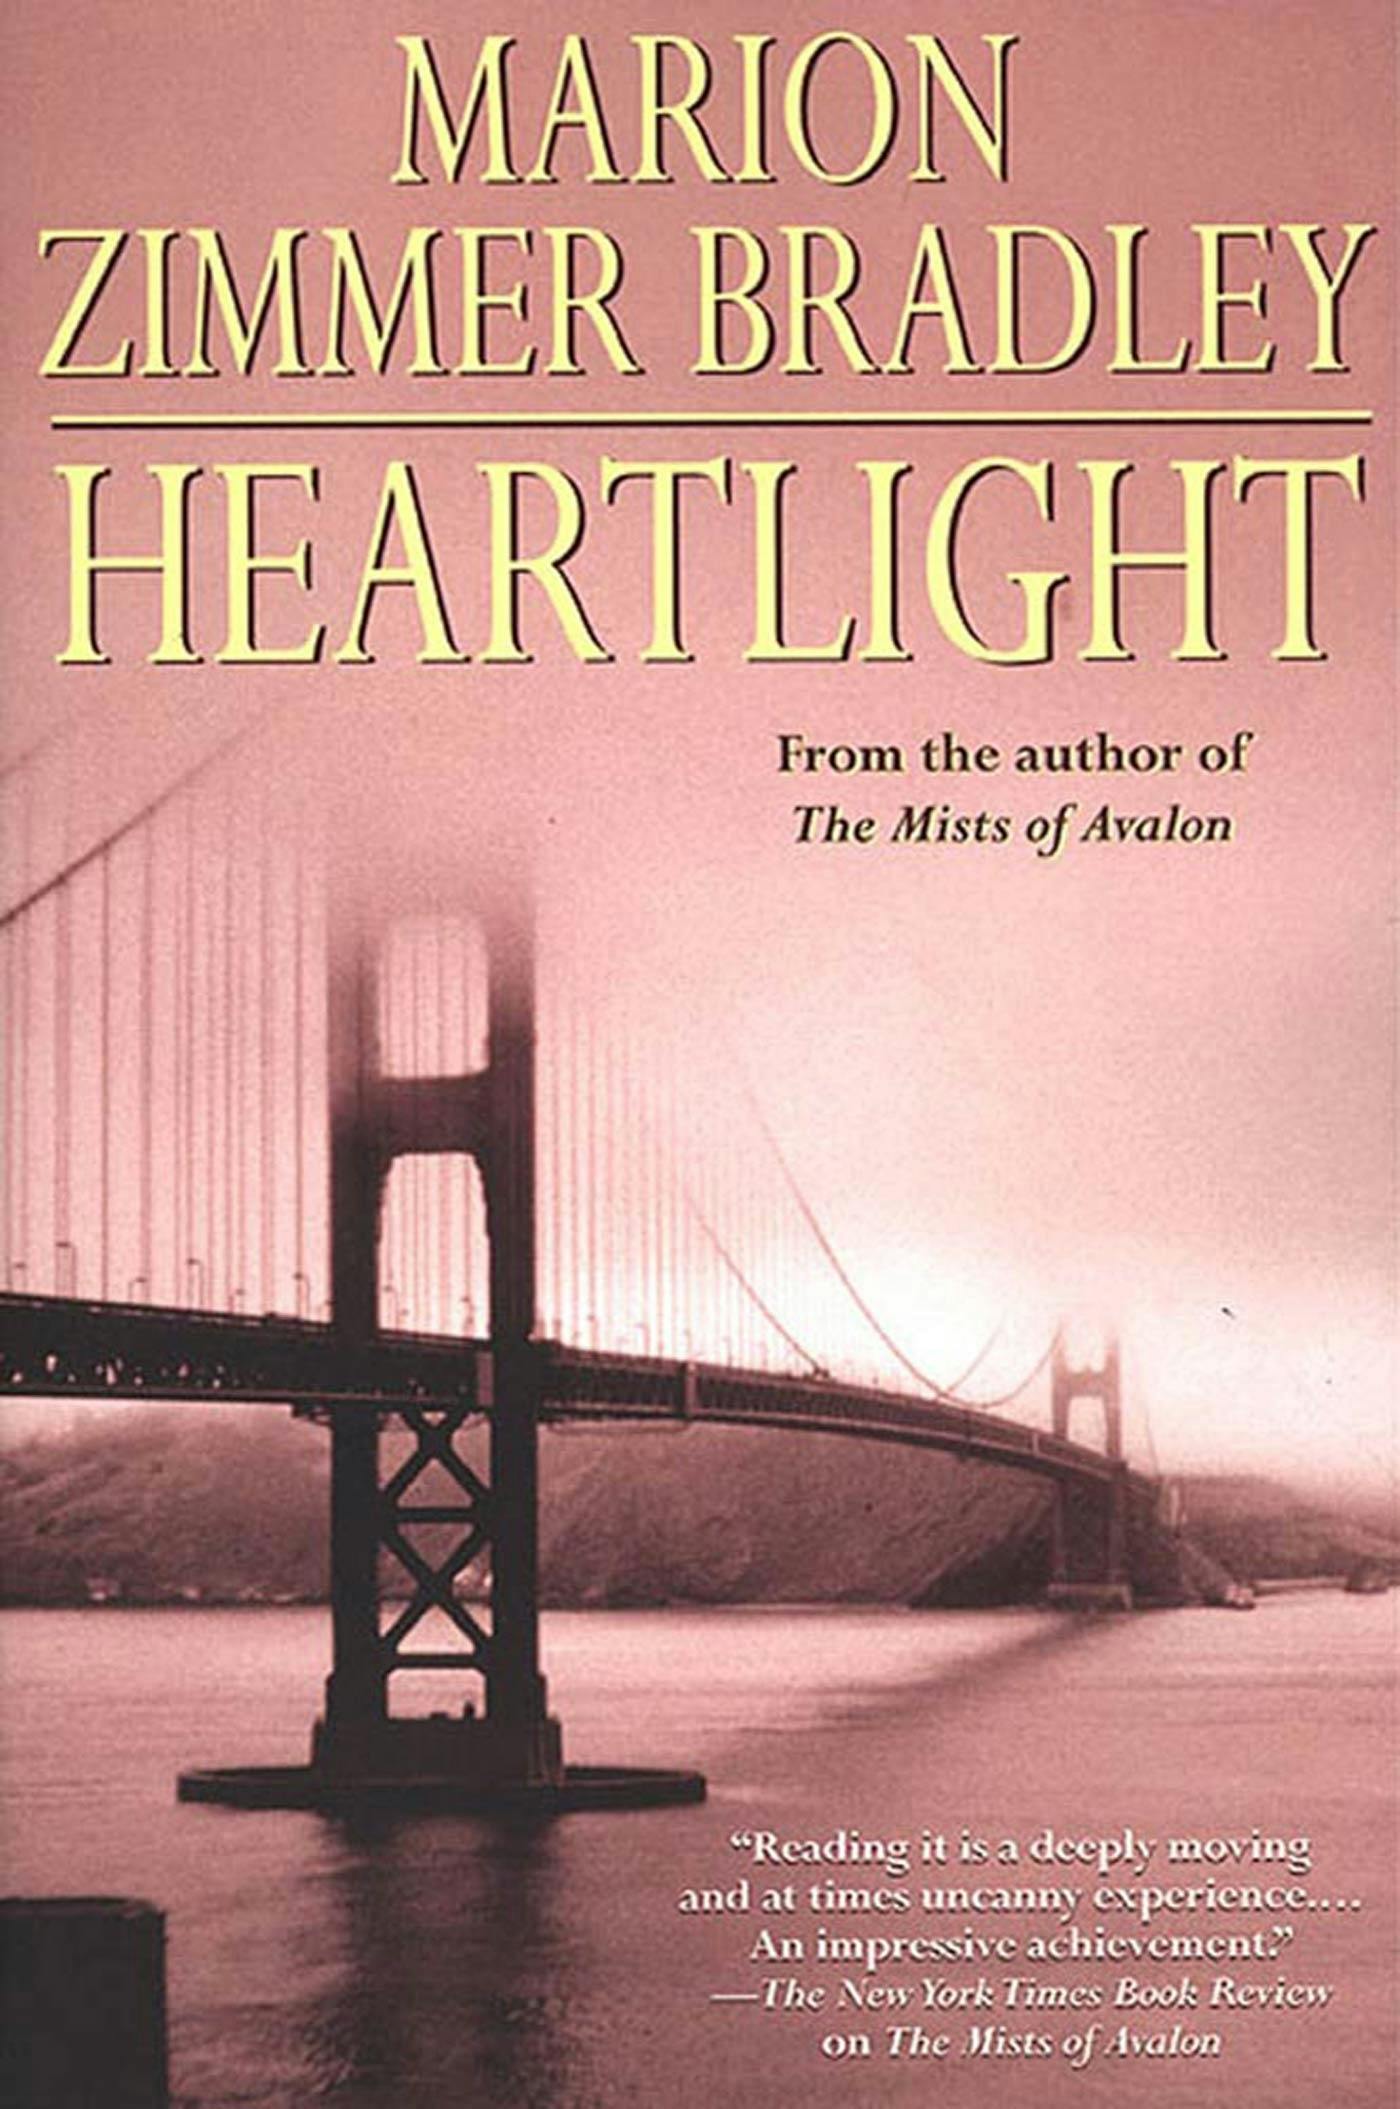 Cover for the book titled as: Heartlight